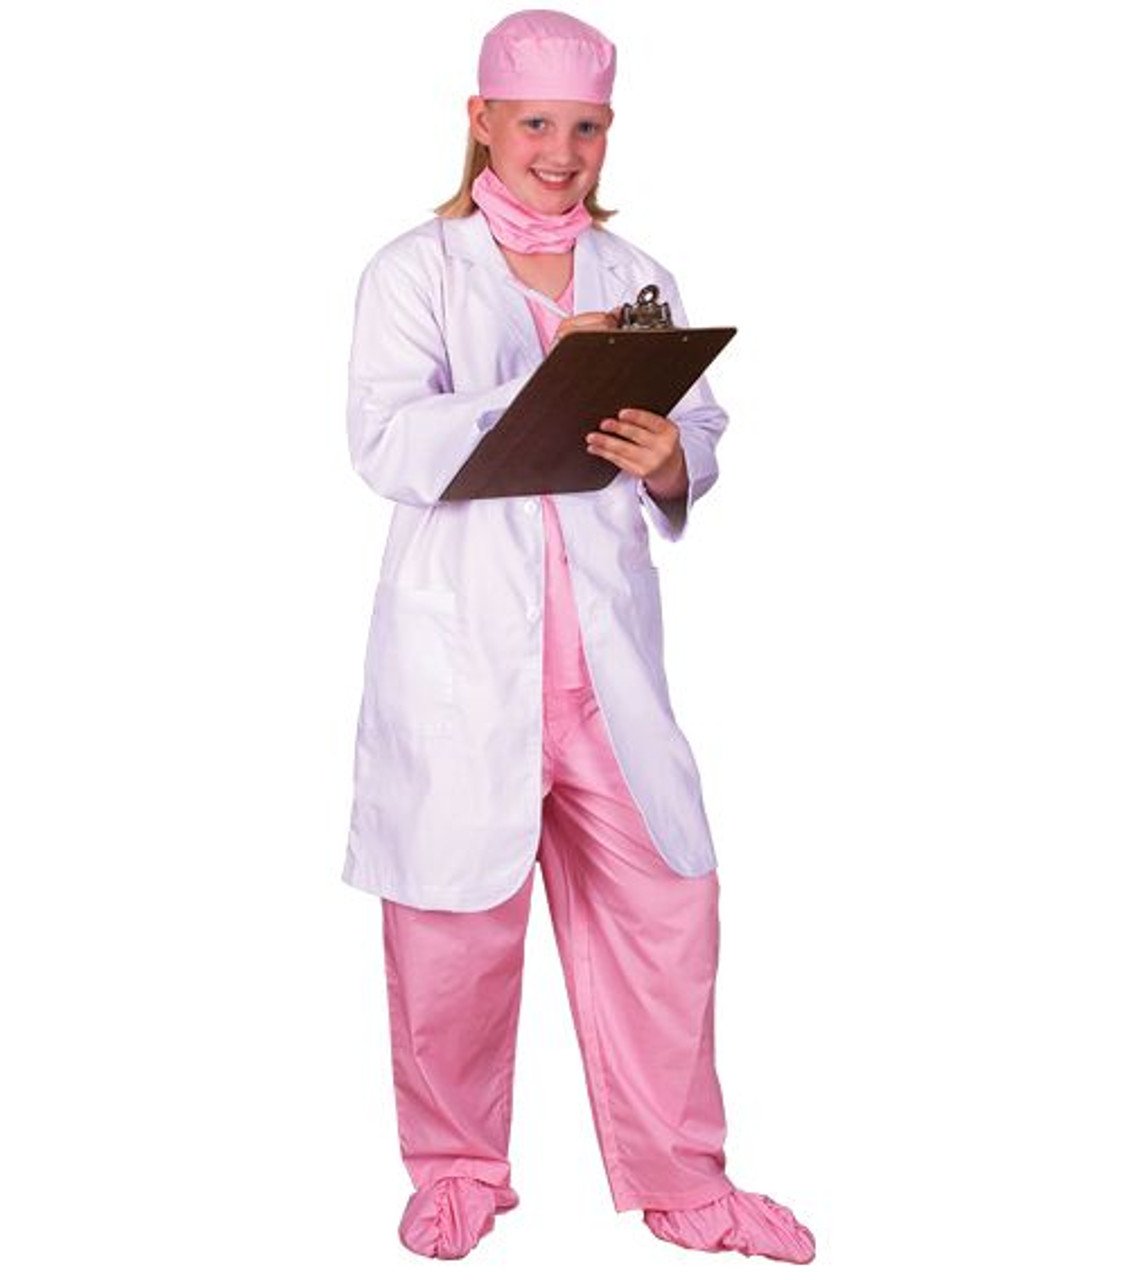 Personalized Kids Doctor Costume - Pink